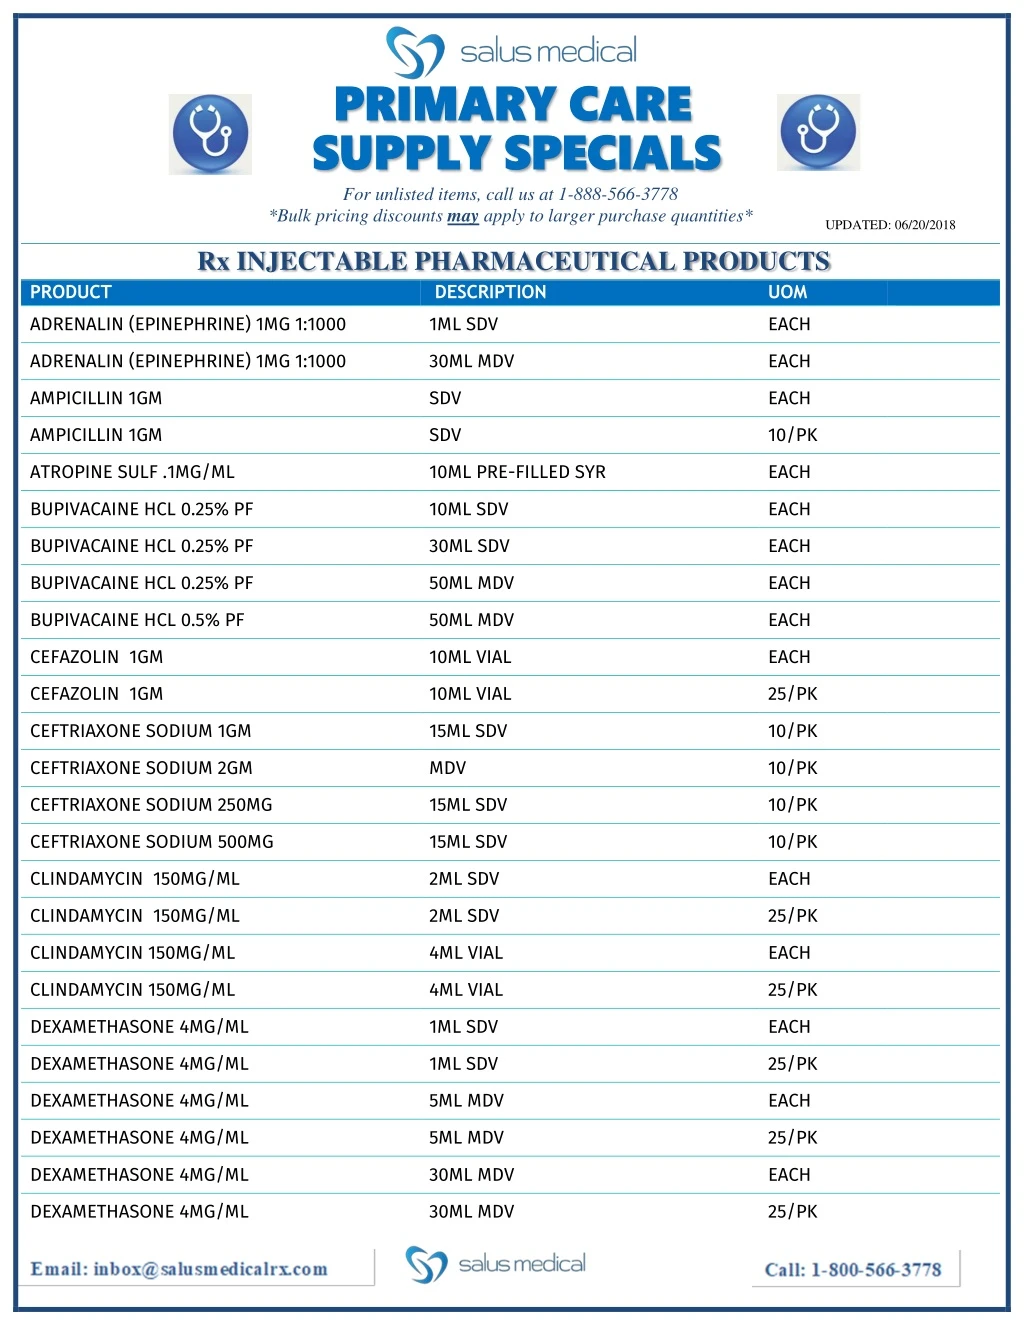 primary care primary care supply specials supply